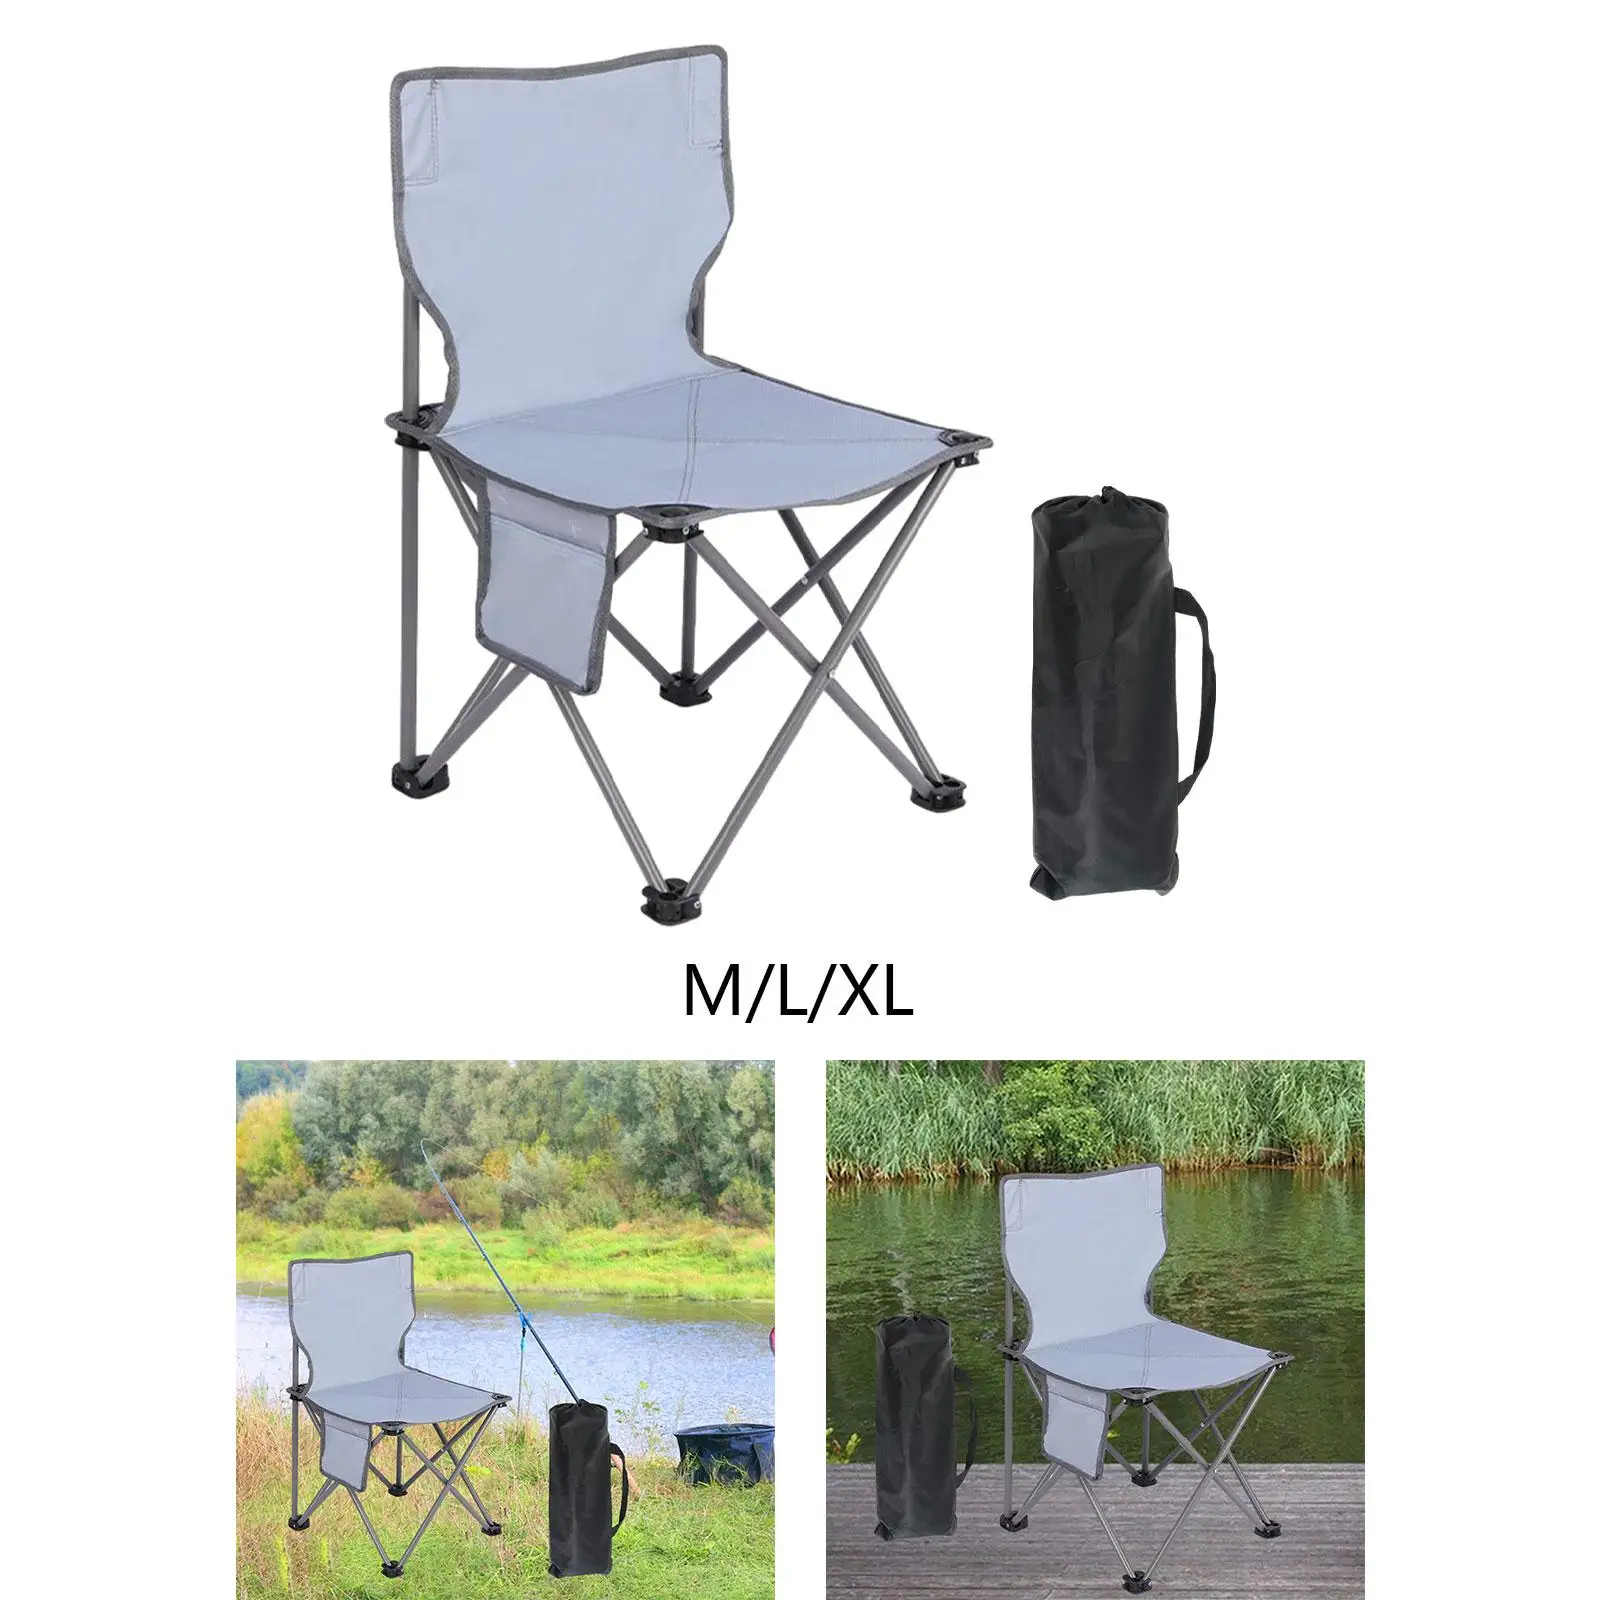 Portable Camping Chair for Heavy People Backrest Chair Lightweight Folding Chair for Outside for Concert Patio Beach Hiking Lawn